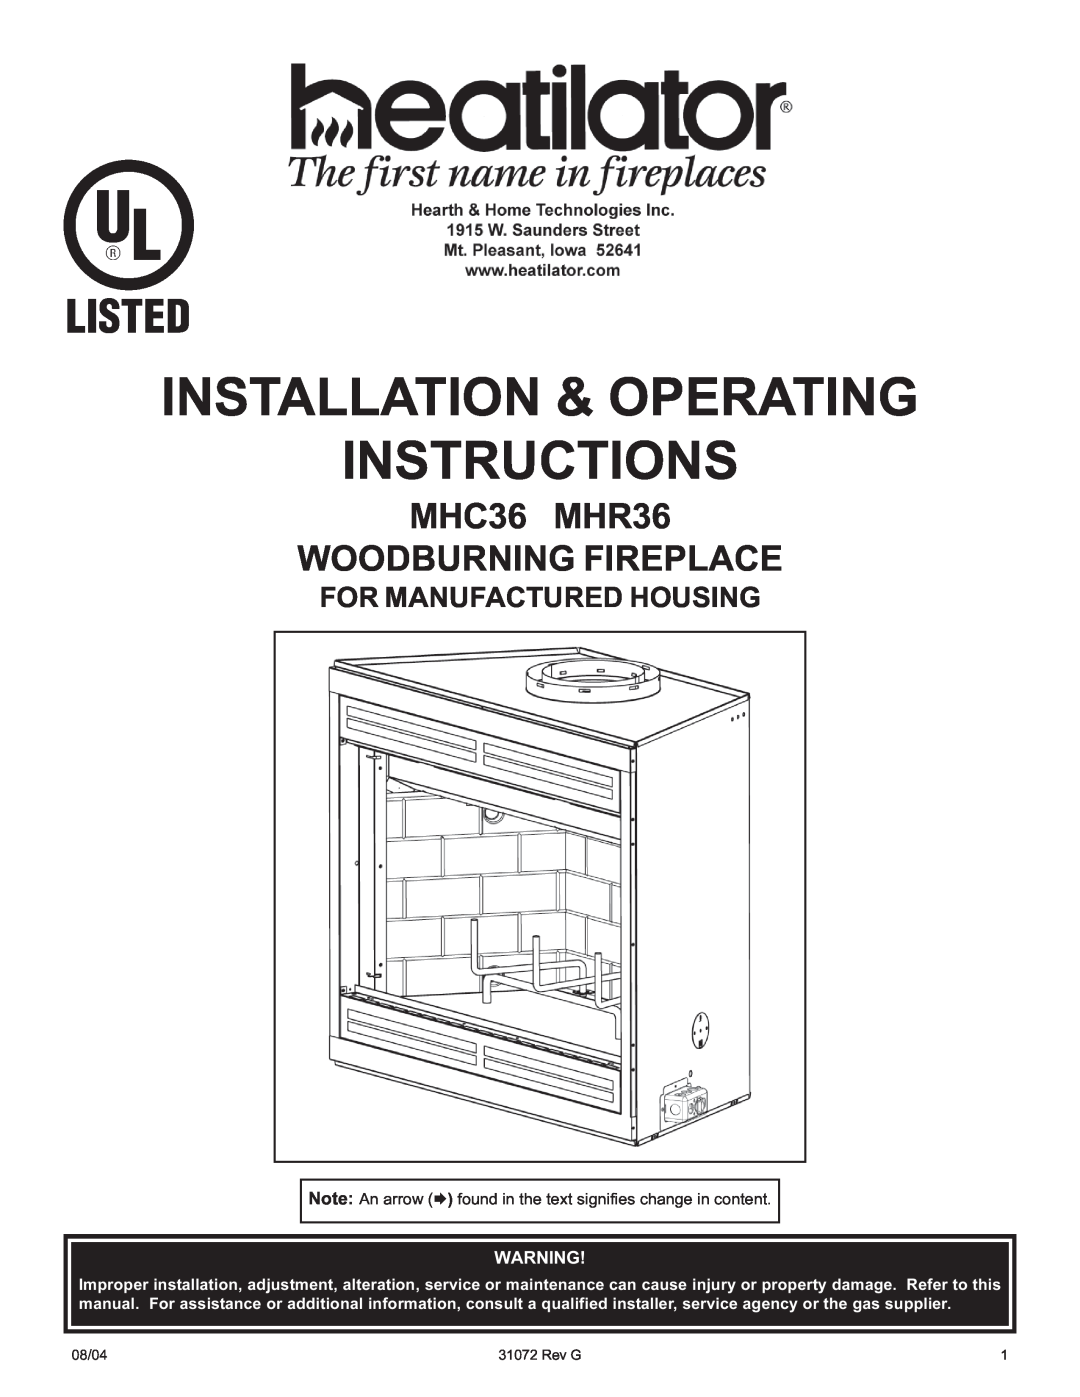 Heart & Home Collectables manual Installation & Operating Instructions, MHC36 MHR36 WOODBURNING FIREPLACE 